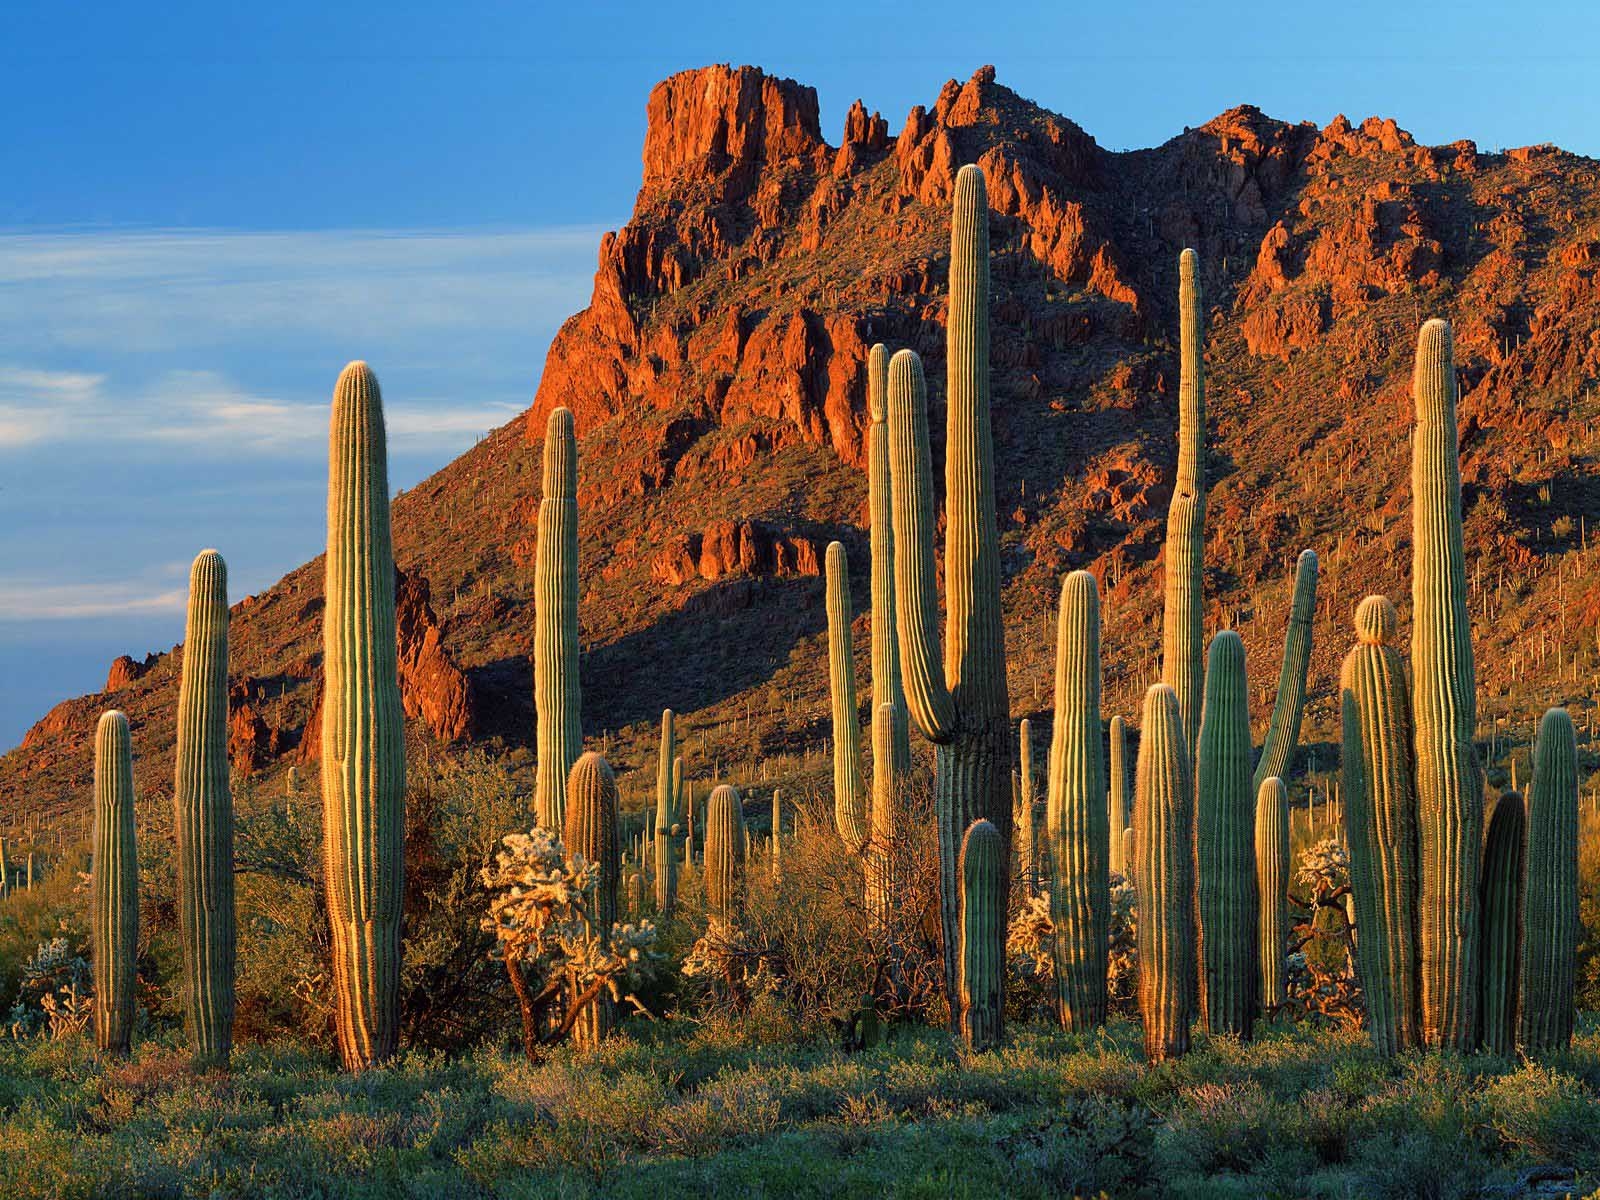 Take a Trip Around the US and We’ll Guess Where You Are from Arizona